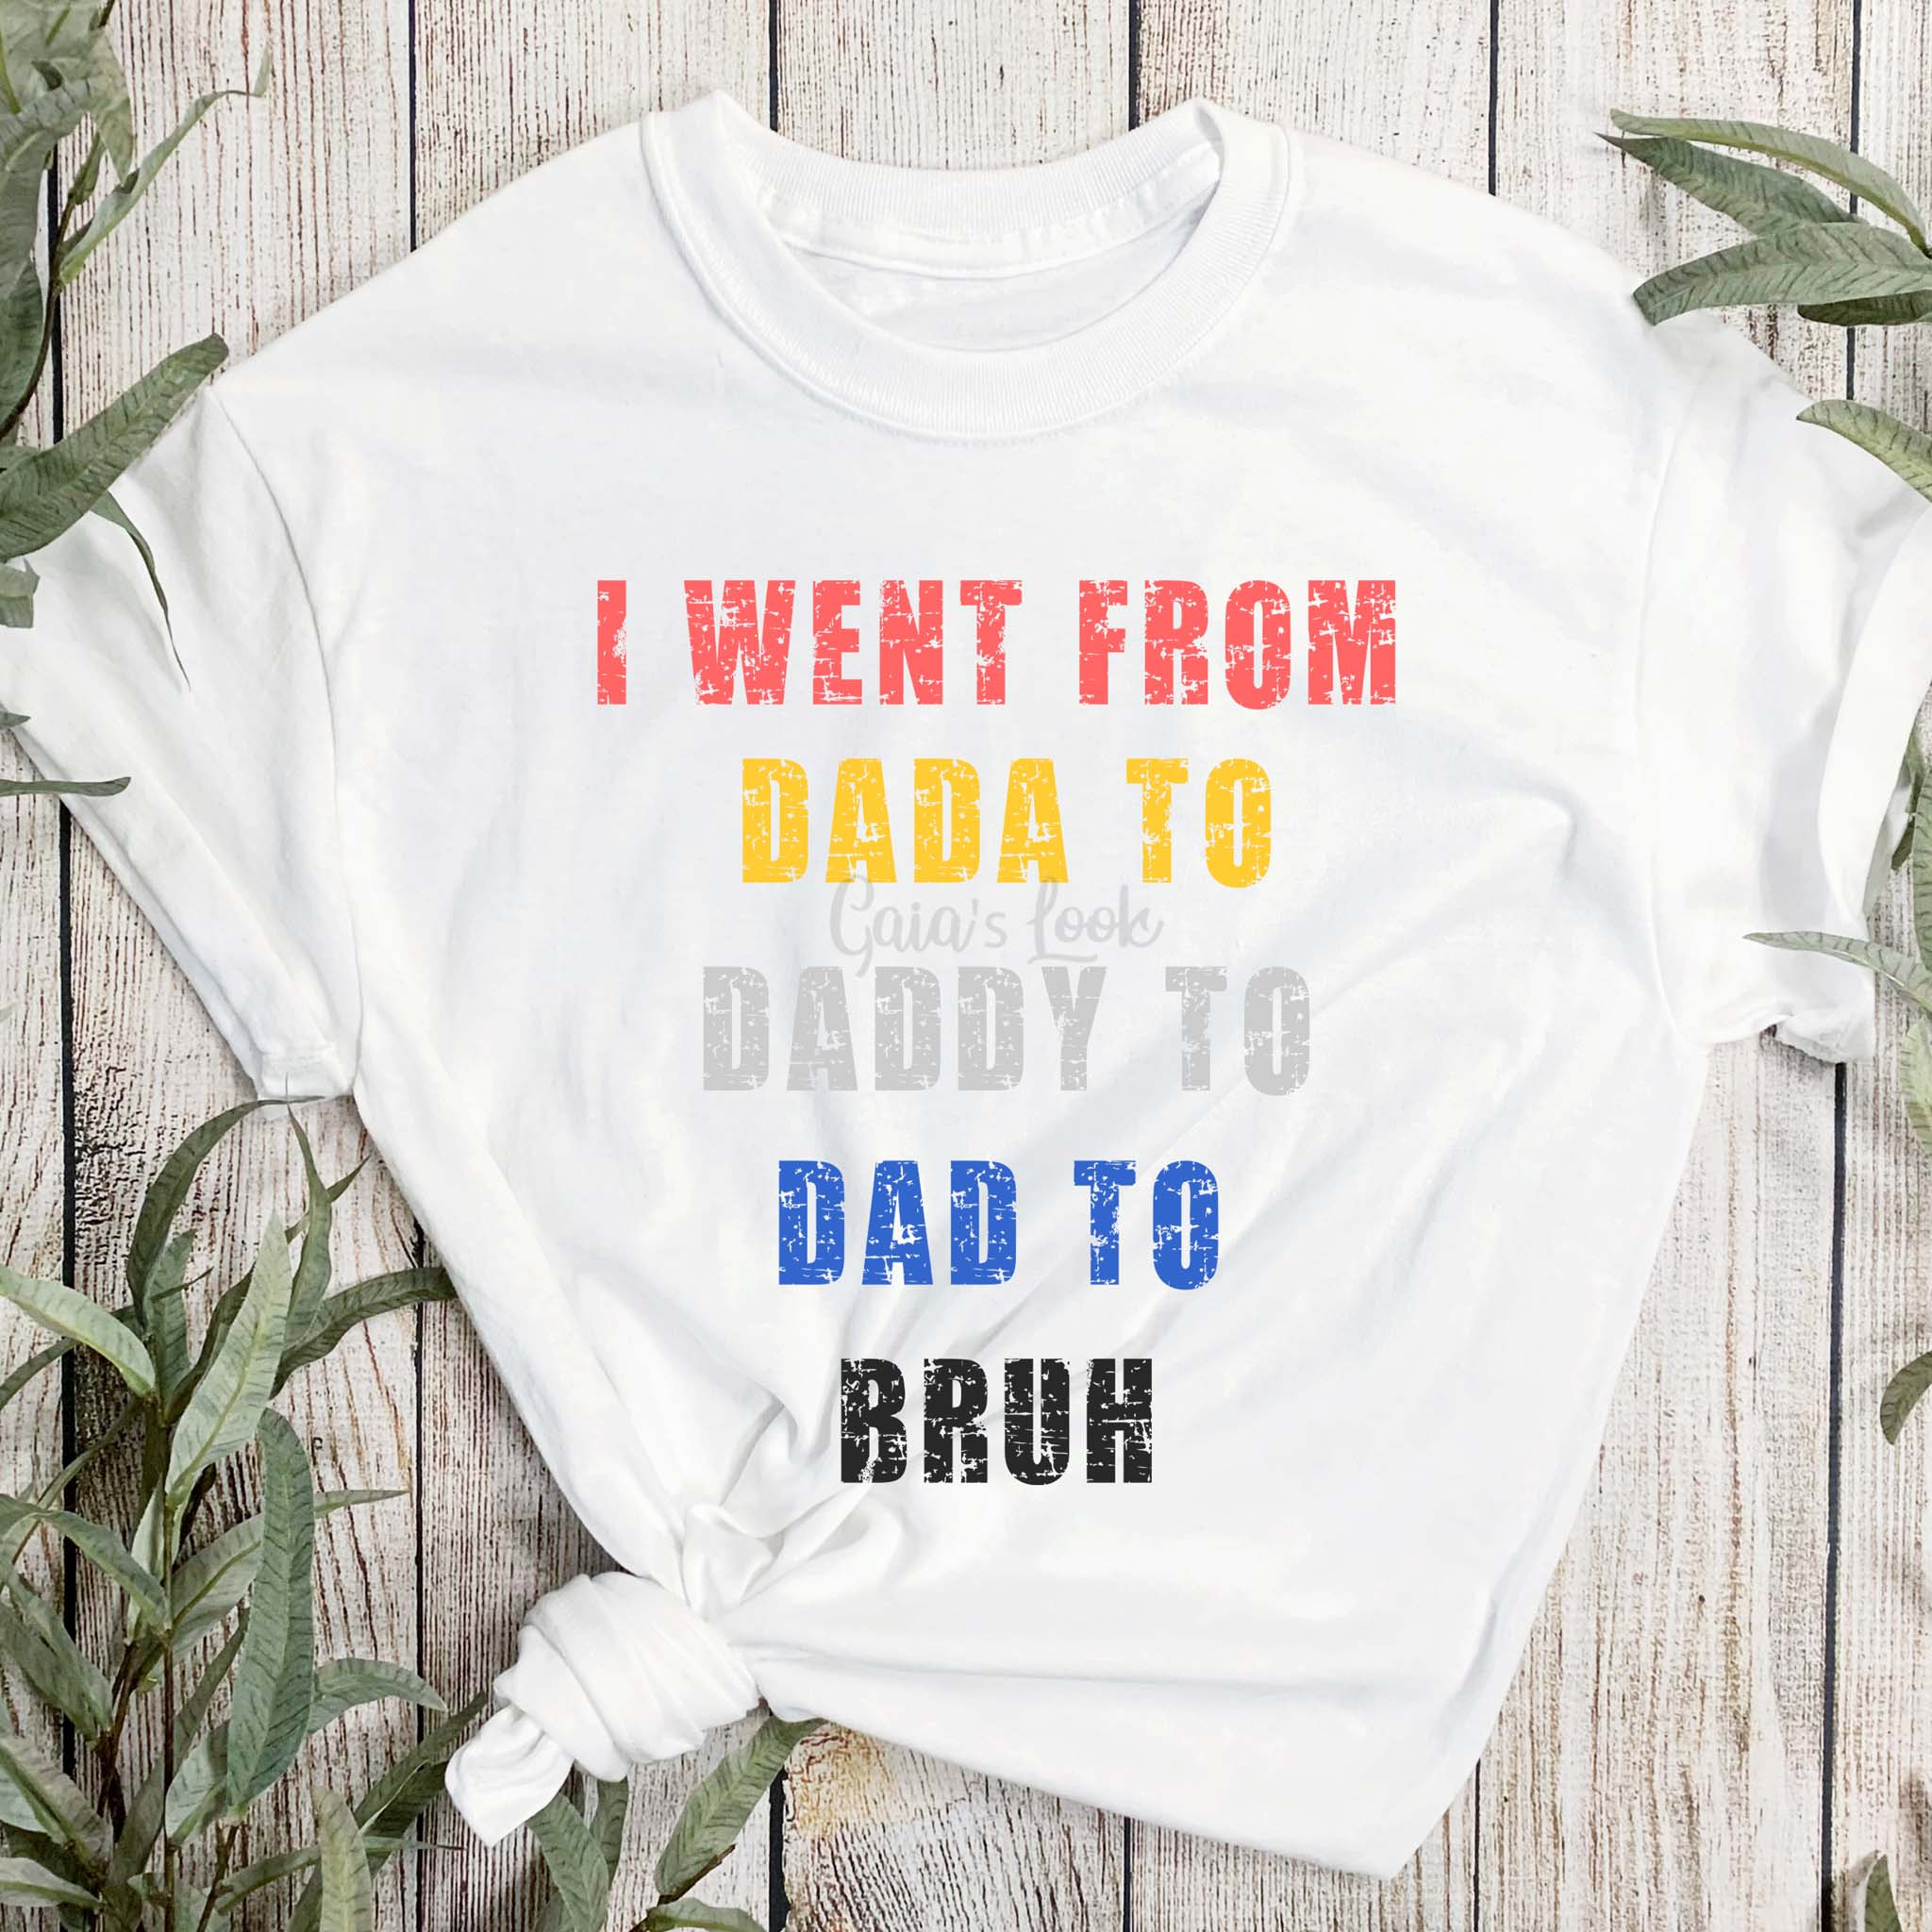 I went from dada to daddy to dad to bruh father's day shirt